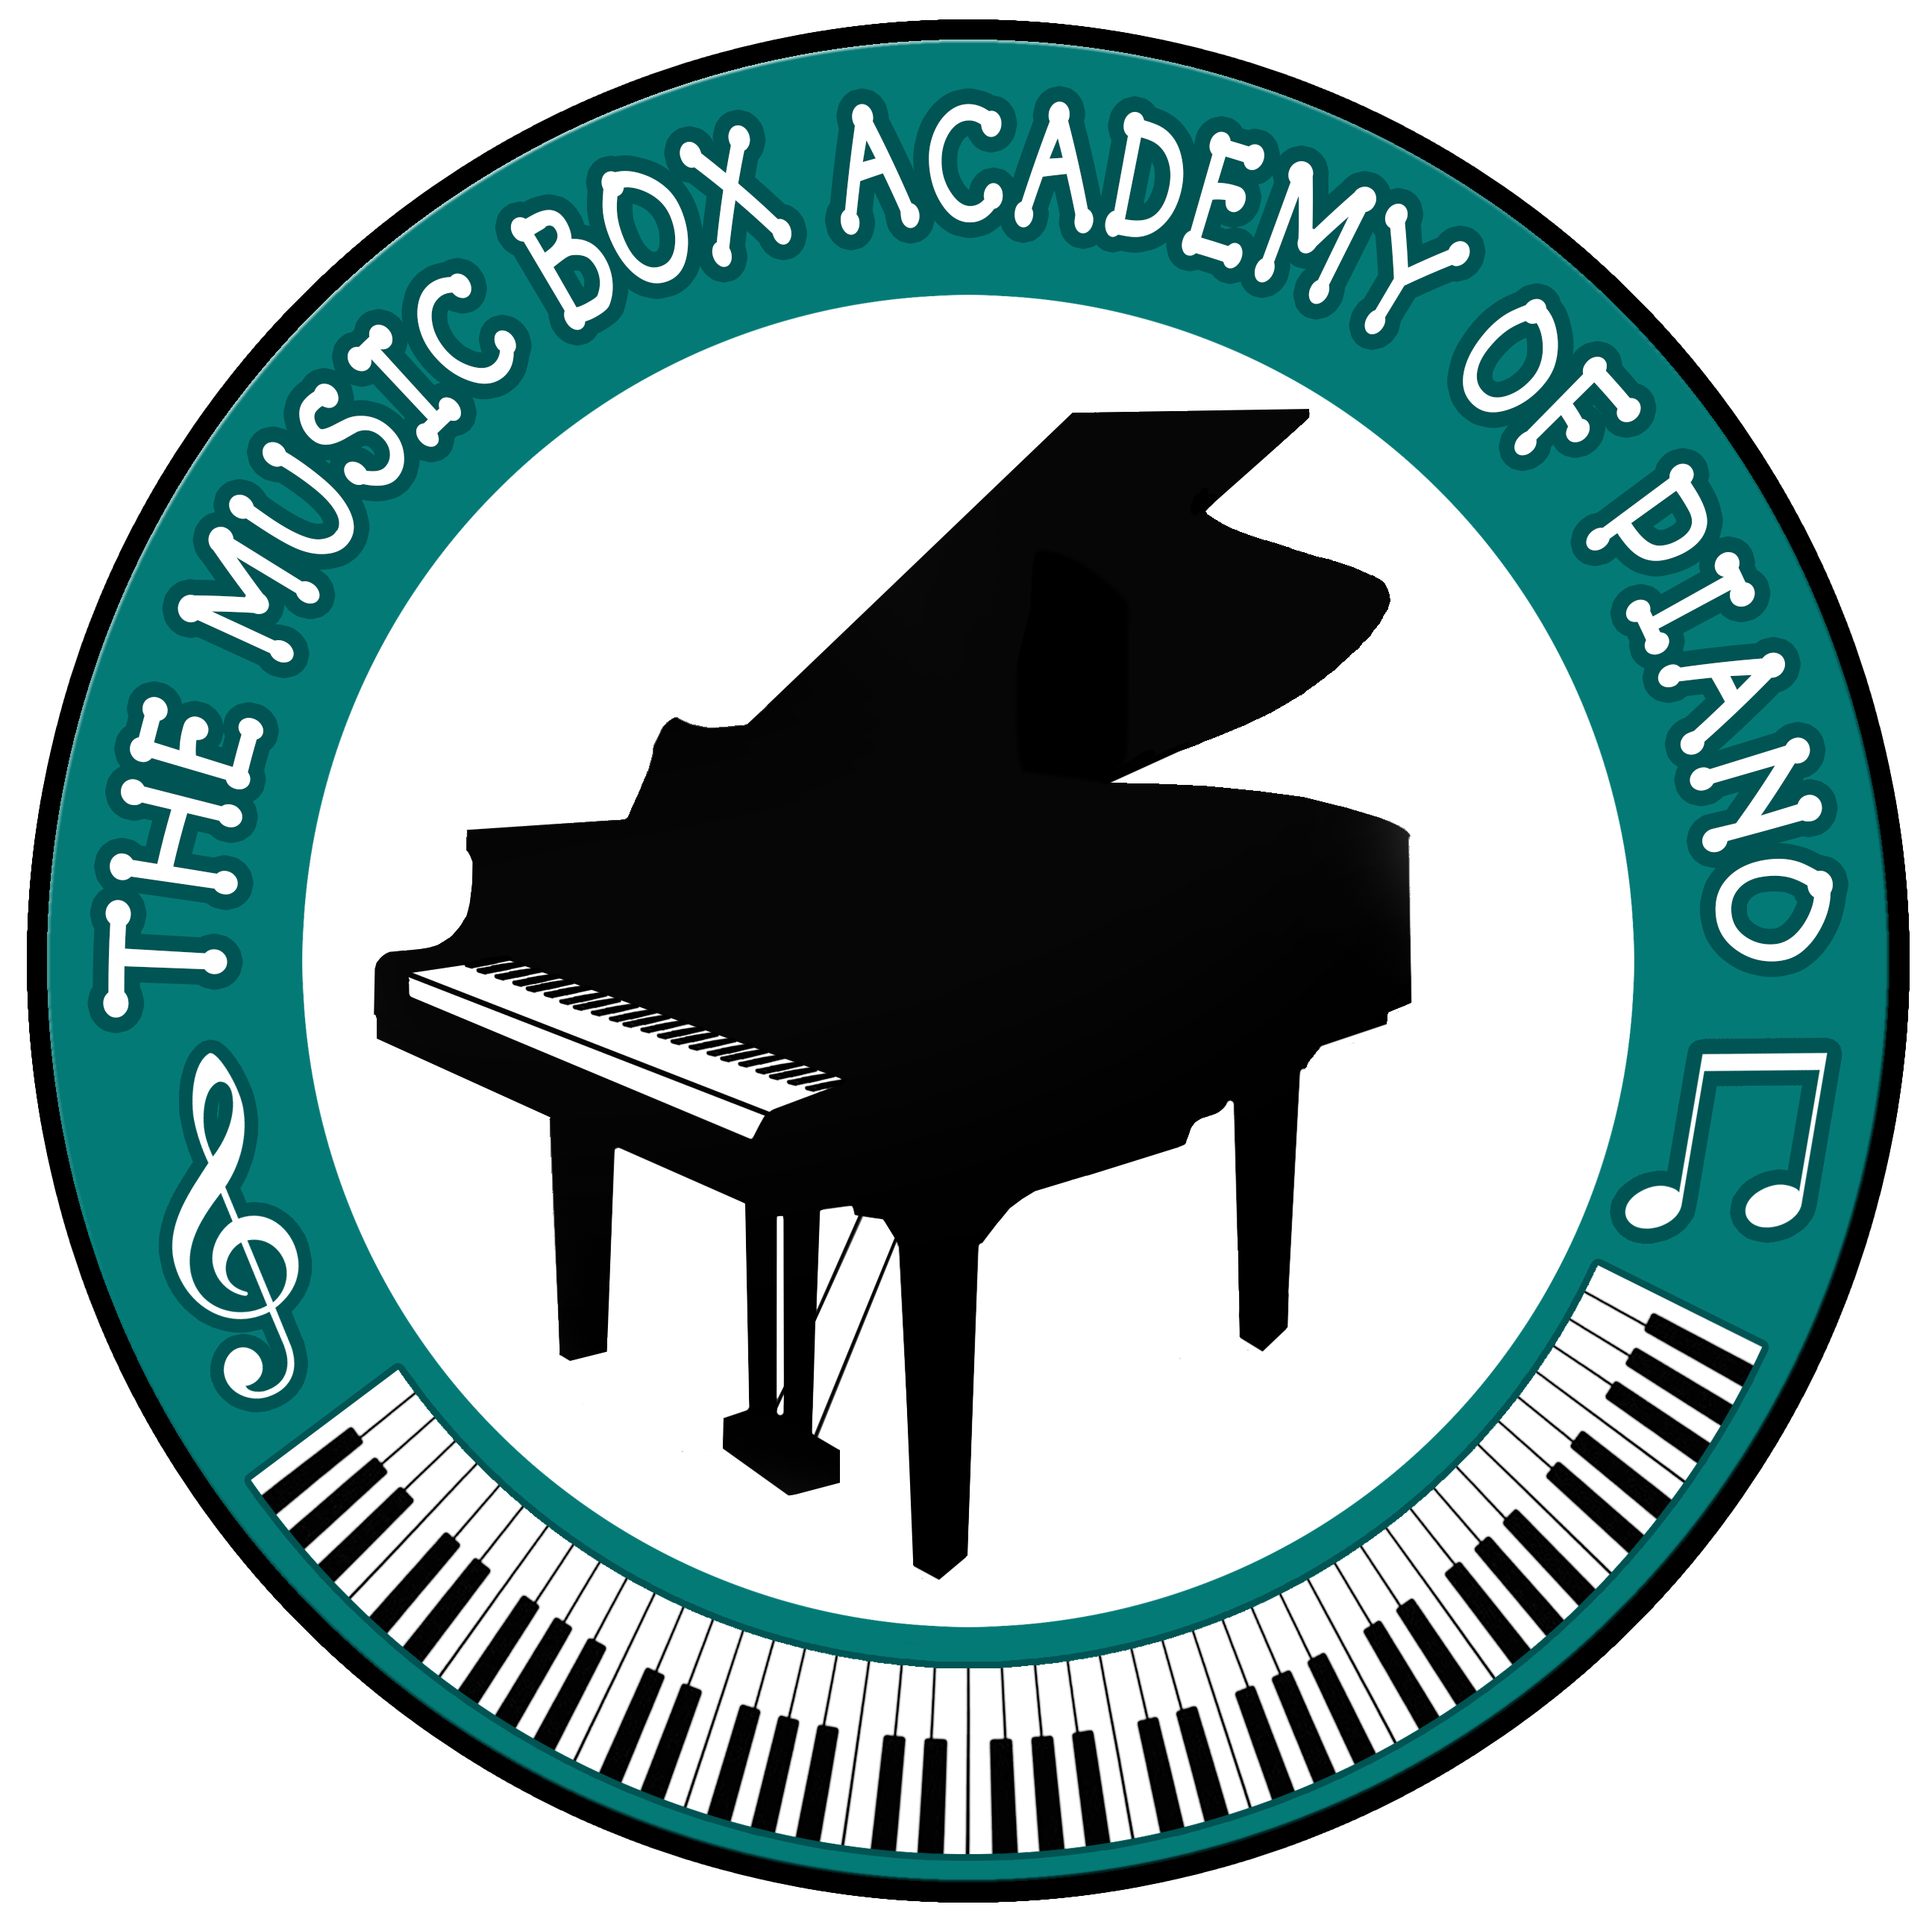 The Music Box Academy of Piano